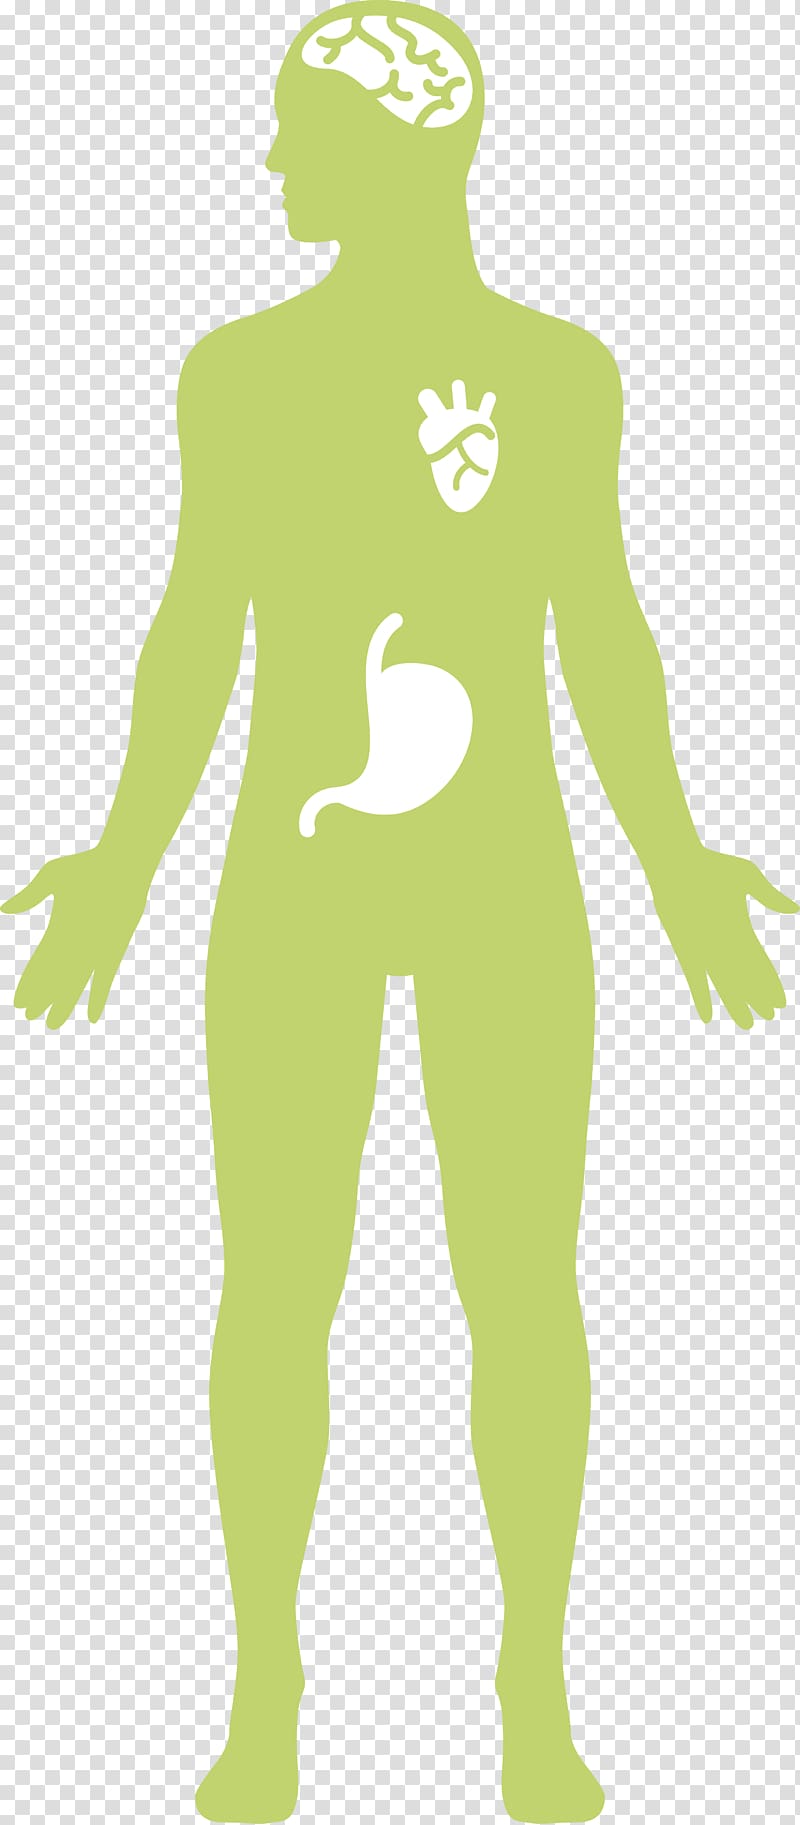 Digestion Human digestive system Gastrointestinal tract Physiology, cloves transparent background PNG clipart